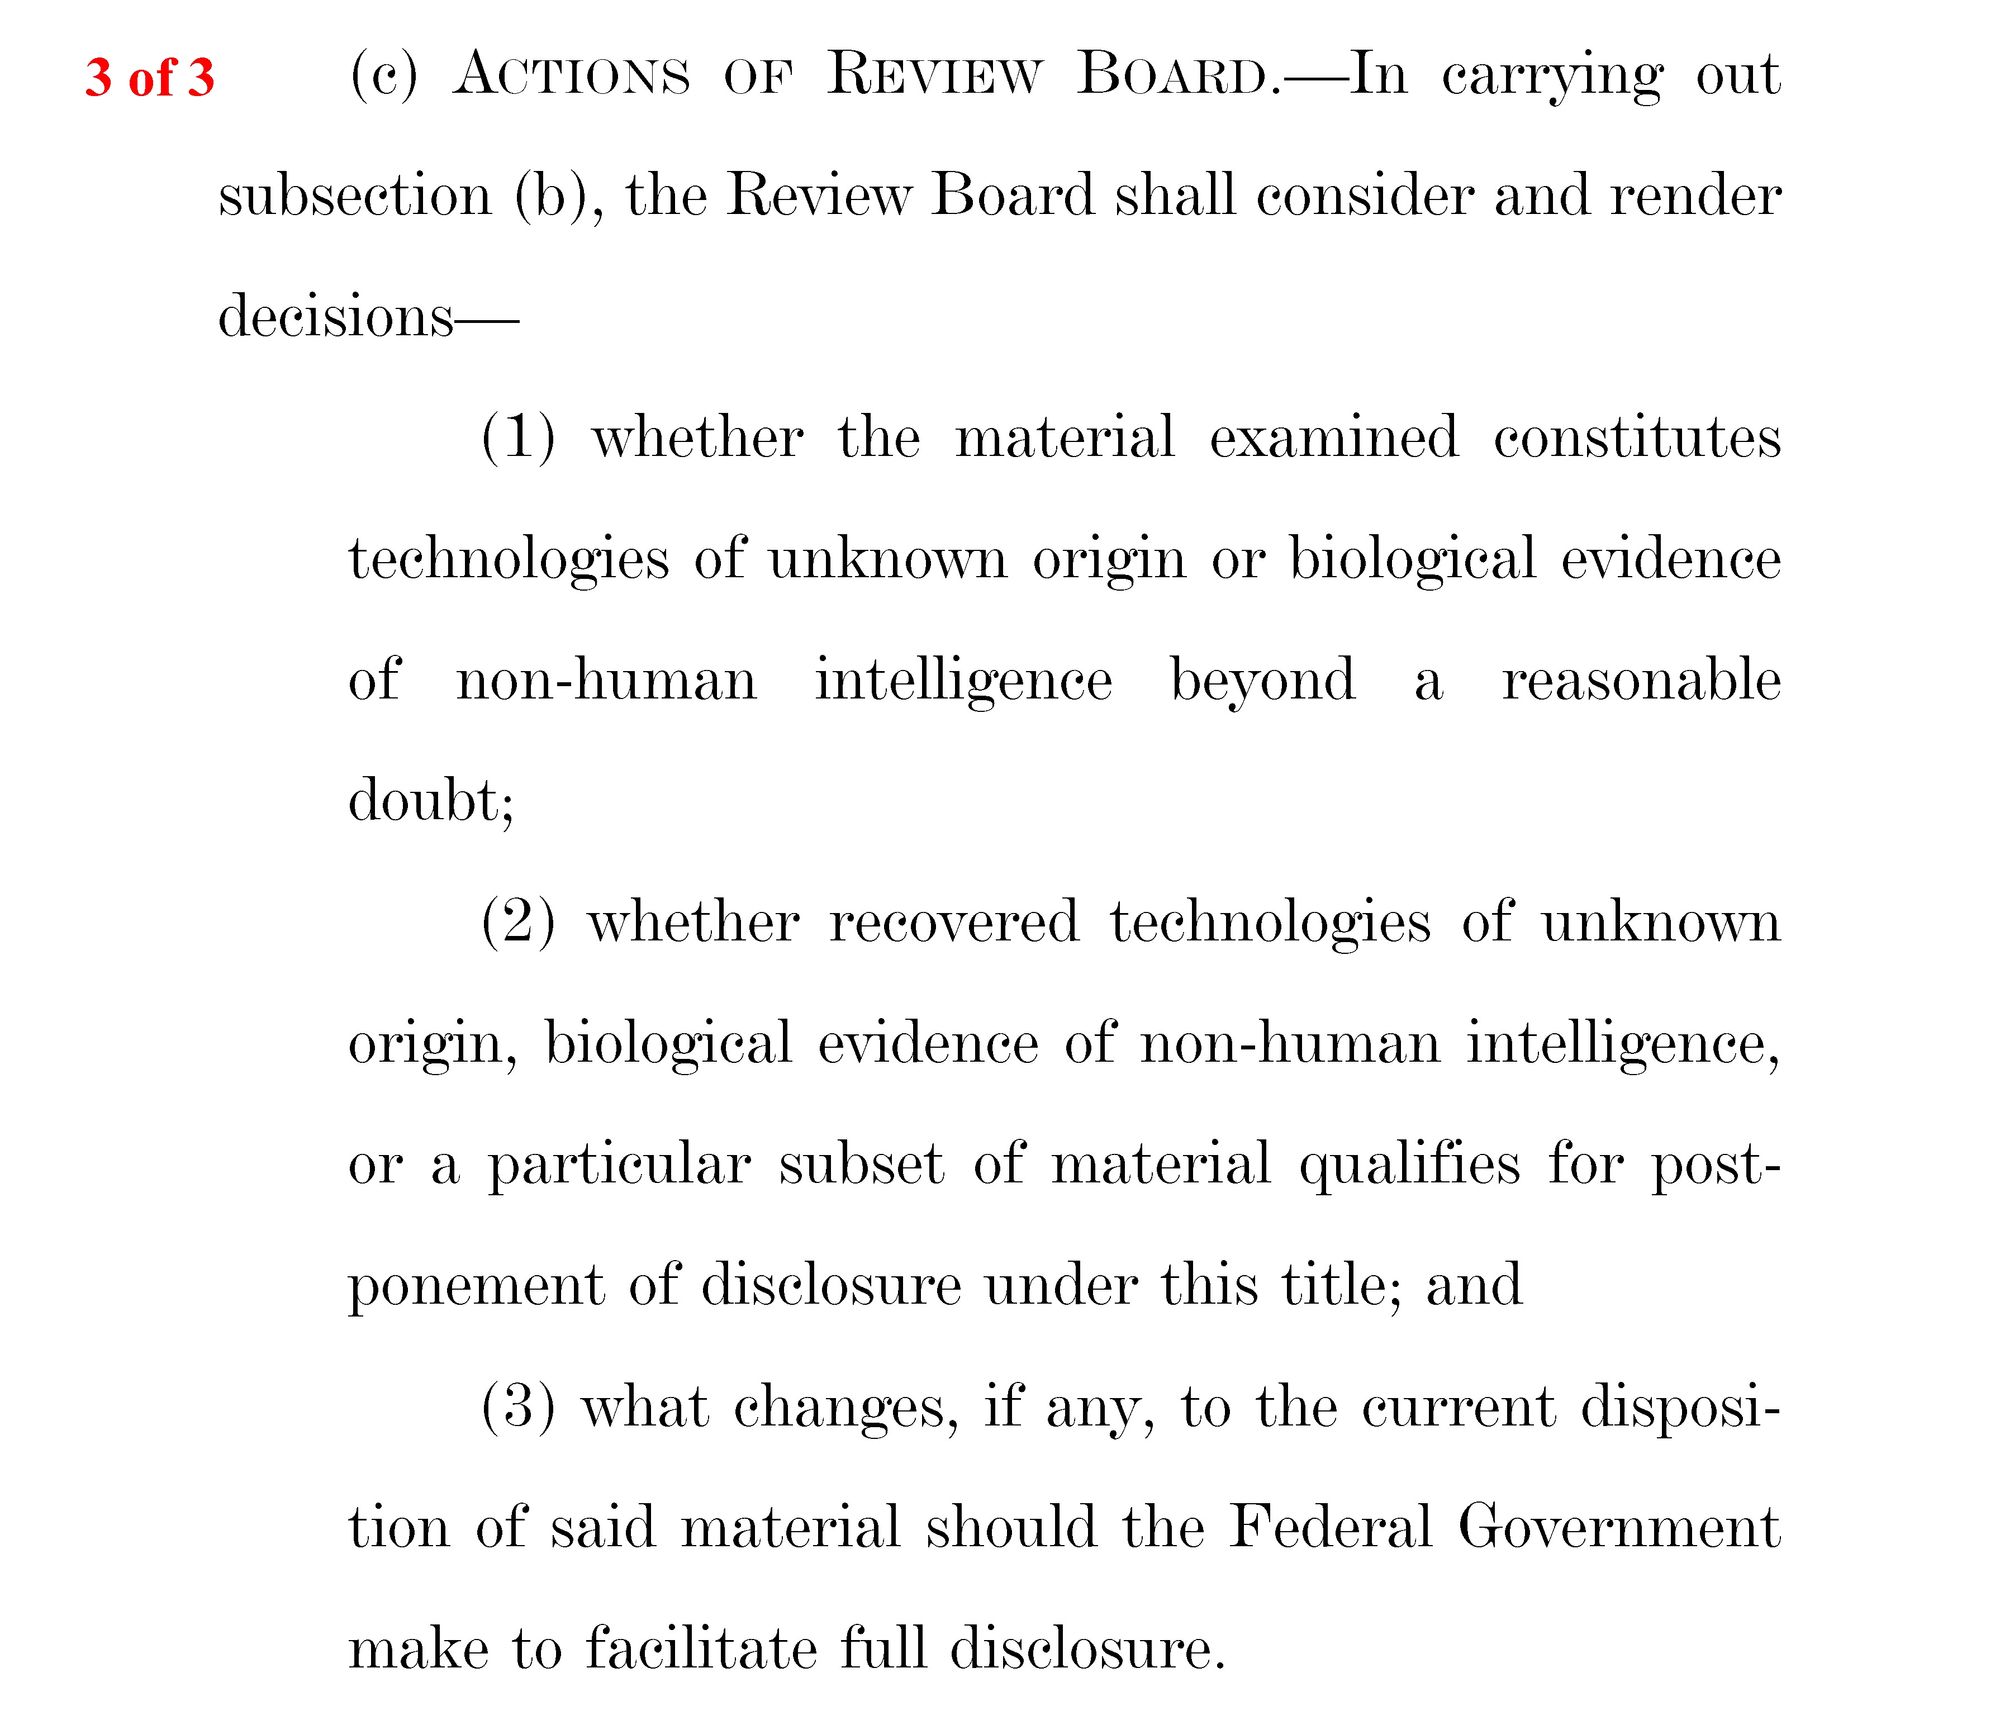 Senate Intelligence bill gives holders of "non-earth origin or exotic UAP material" six months to make it available to AARO